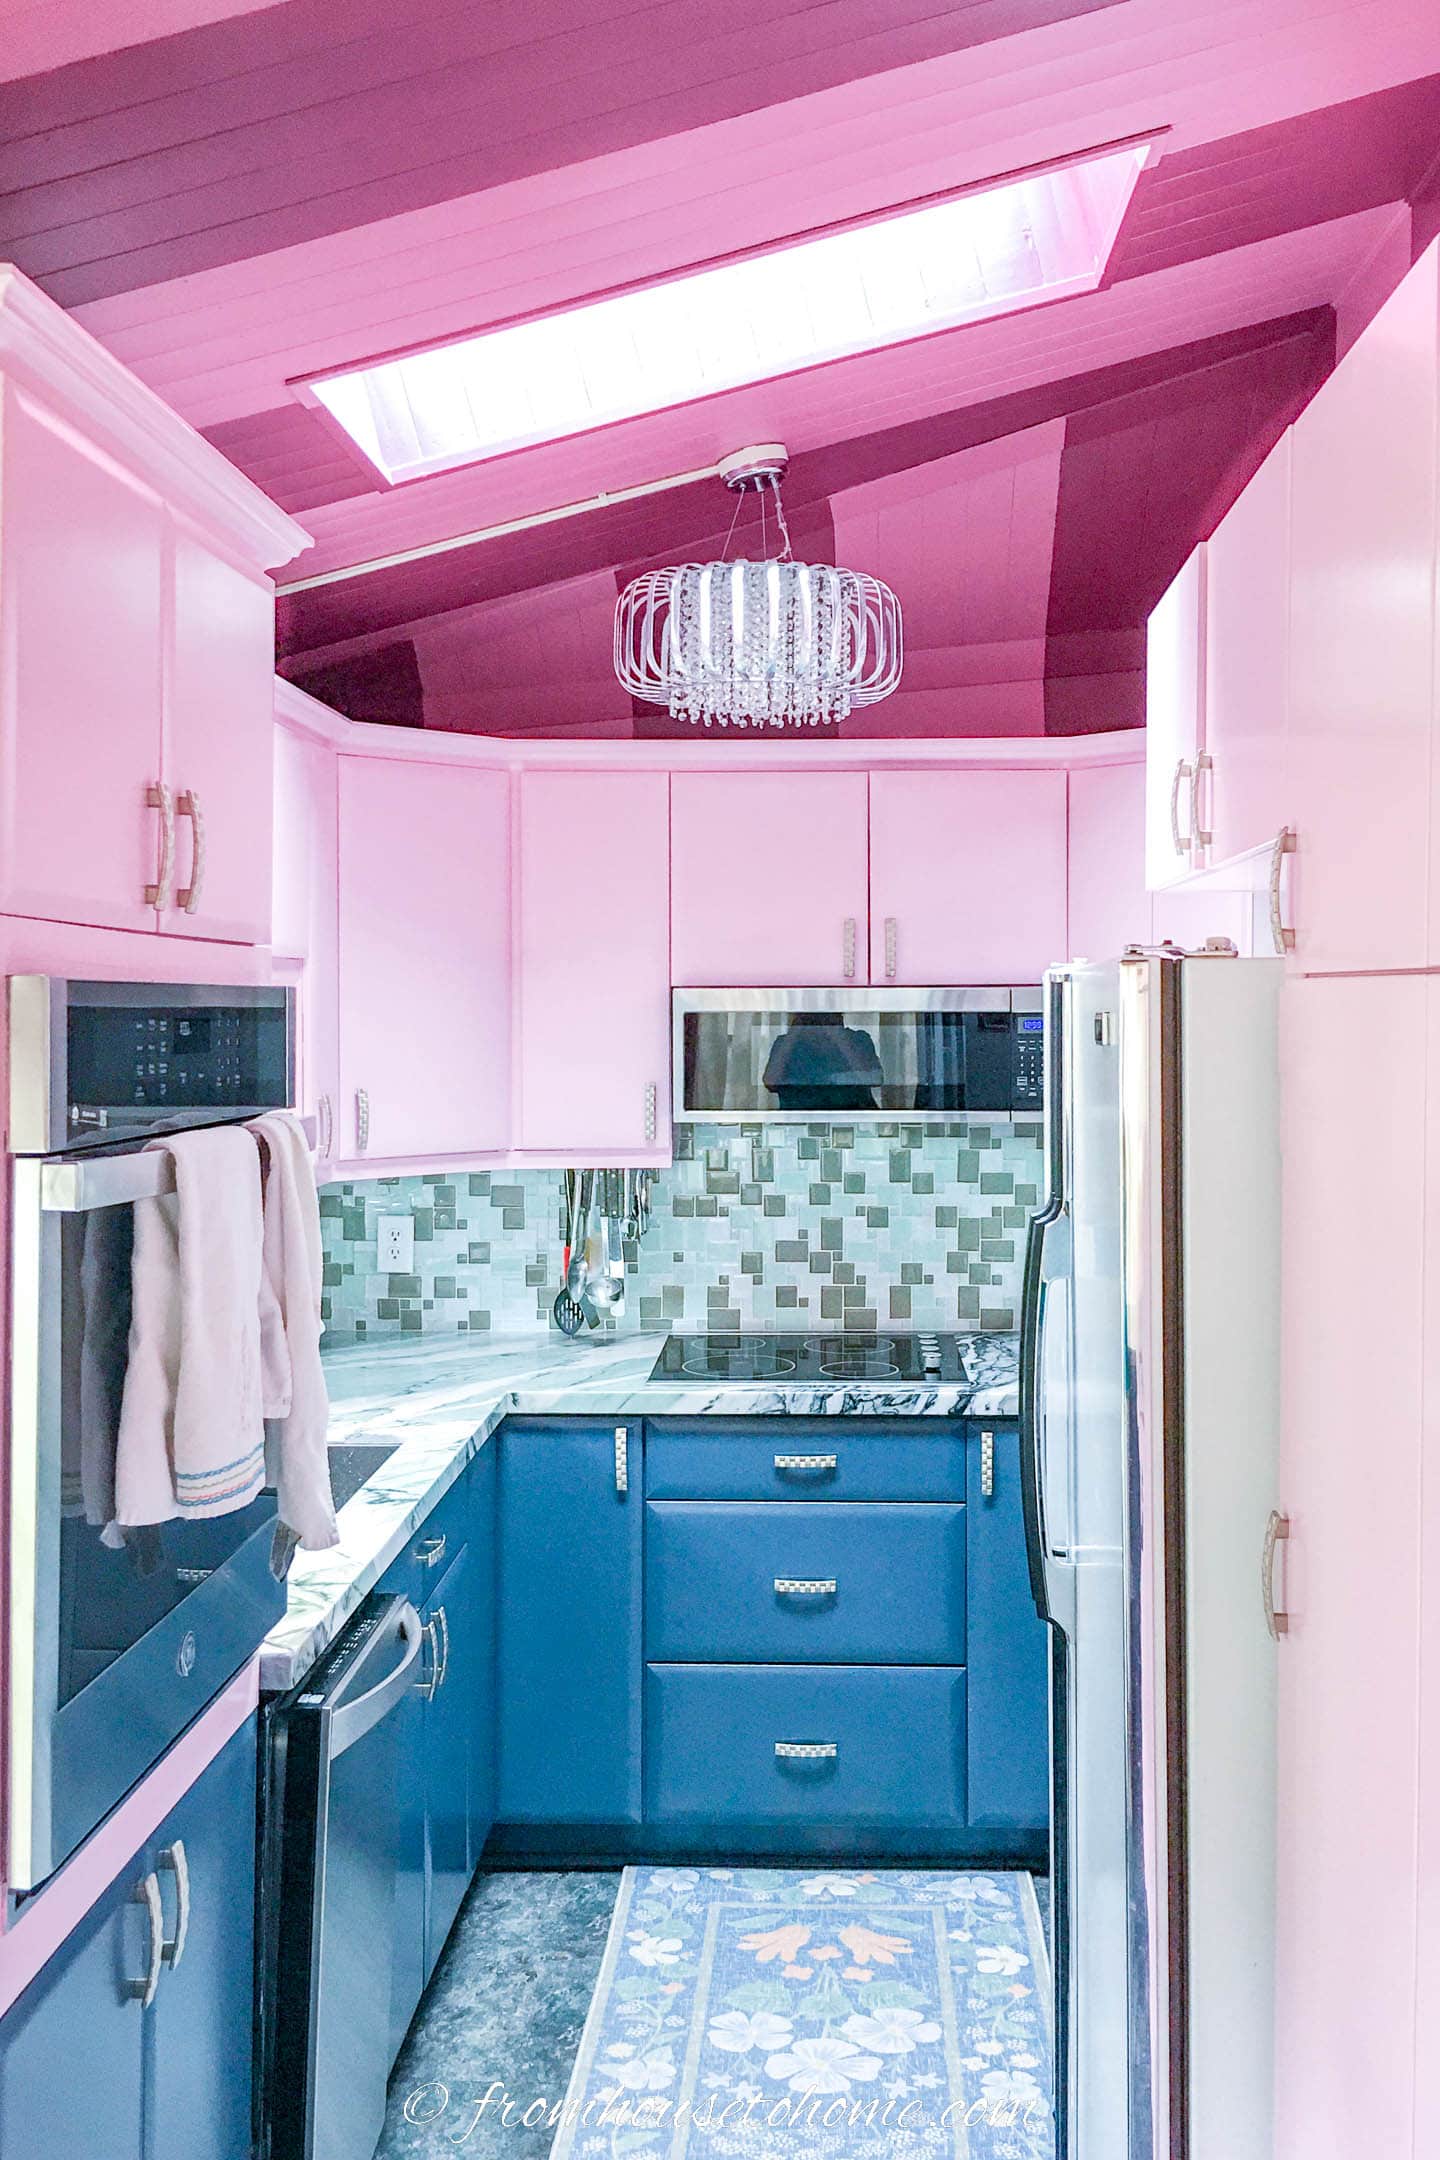 Small galley kitchen finished with pink upper cabinets, teal, white and black countertops, glass mosaic backsplash, and dark teal lower cabinets